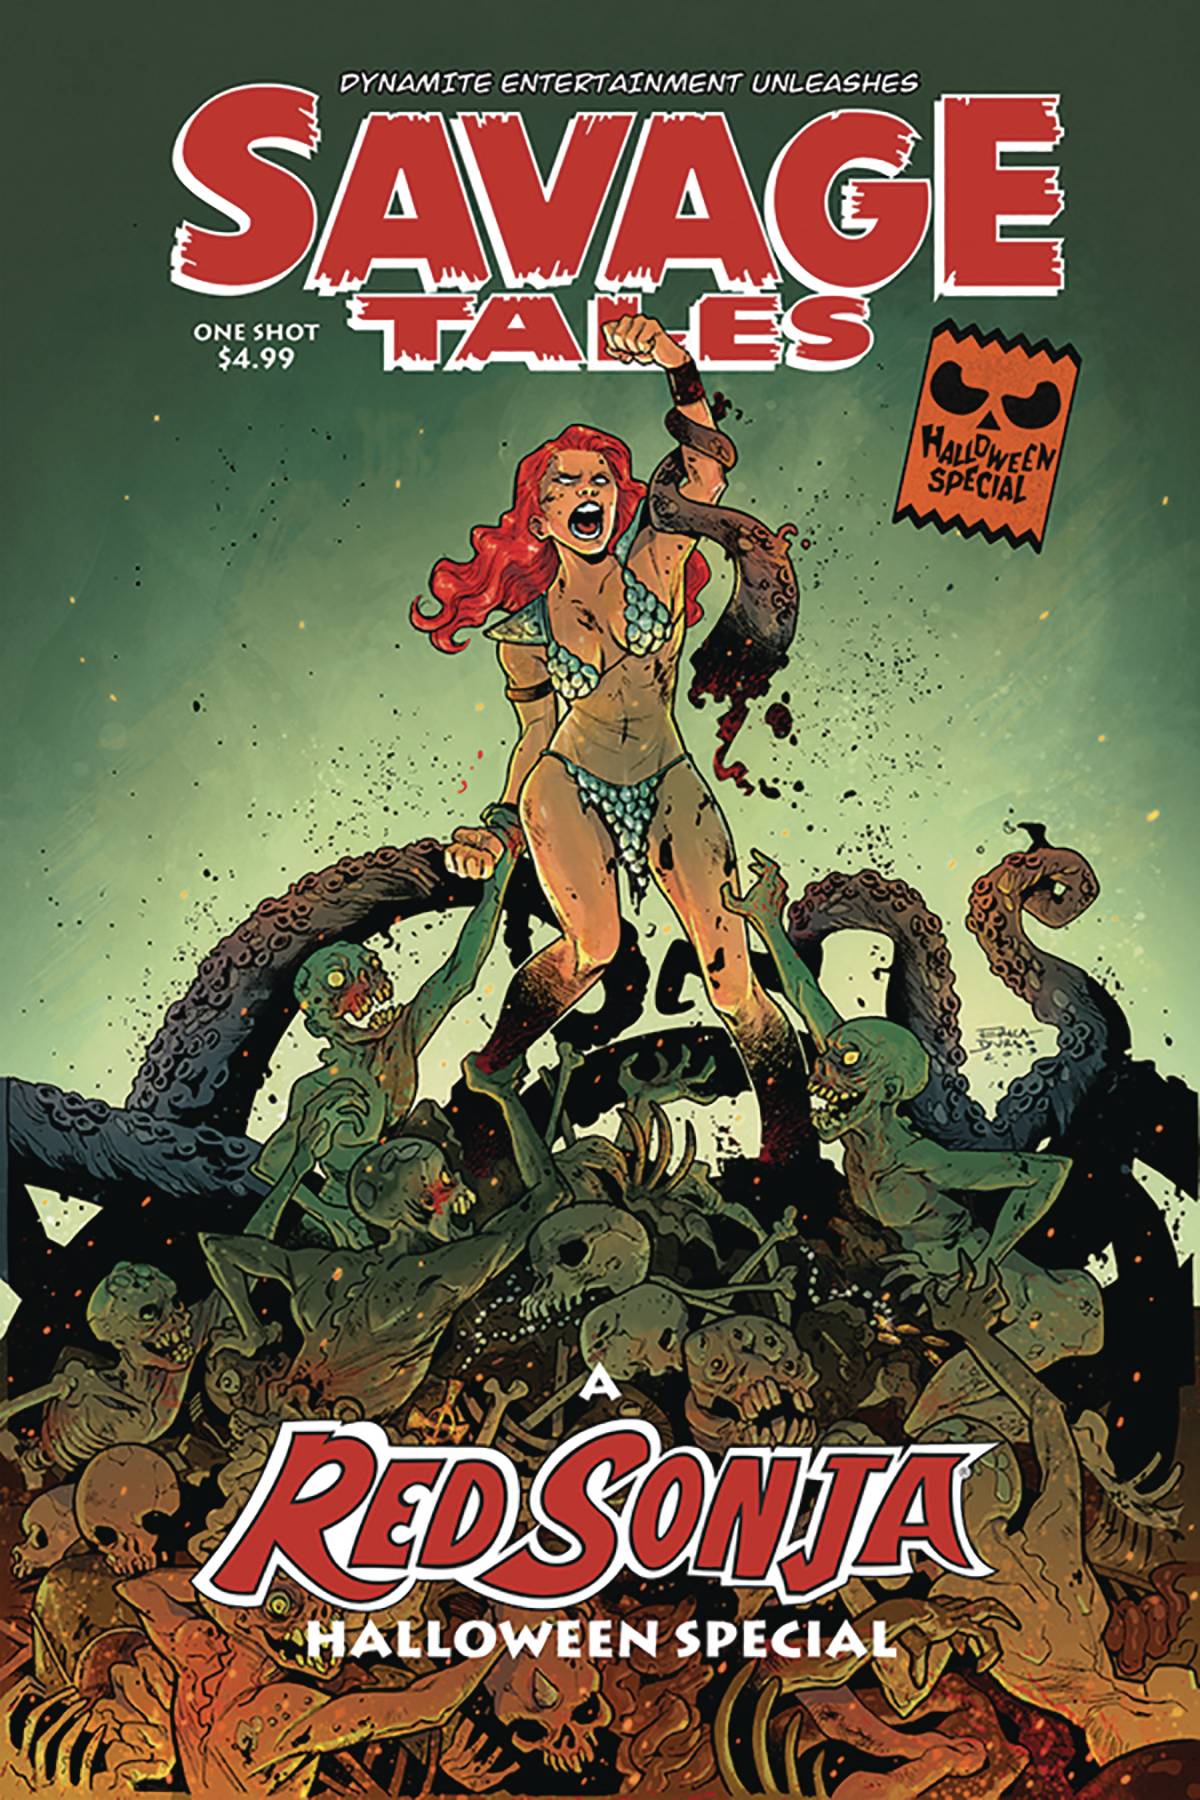 SAVAGE TALES HALLOWEEN SPECIAL ONE SHOT #0 CVR A DURSO